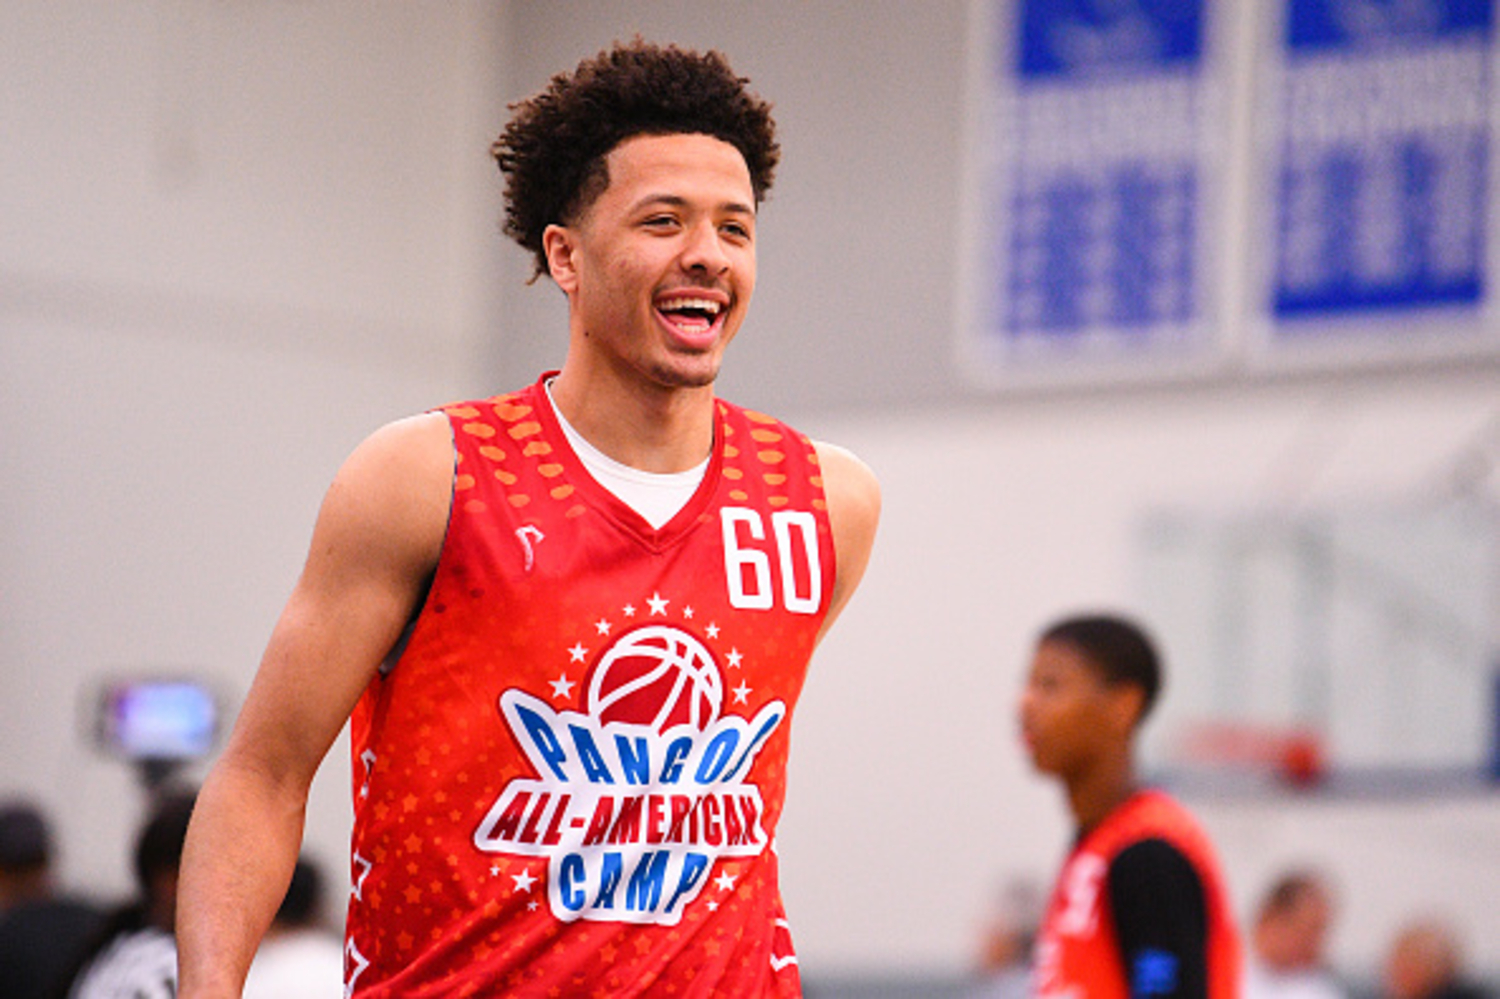 Cade Cunningham is Showing Why He’s a Top NCAA Player and Potential No. 1 Draft Pick